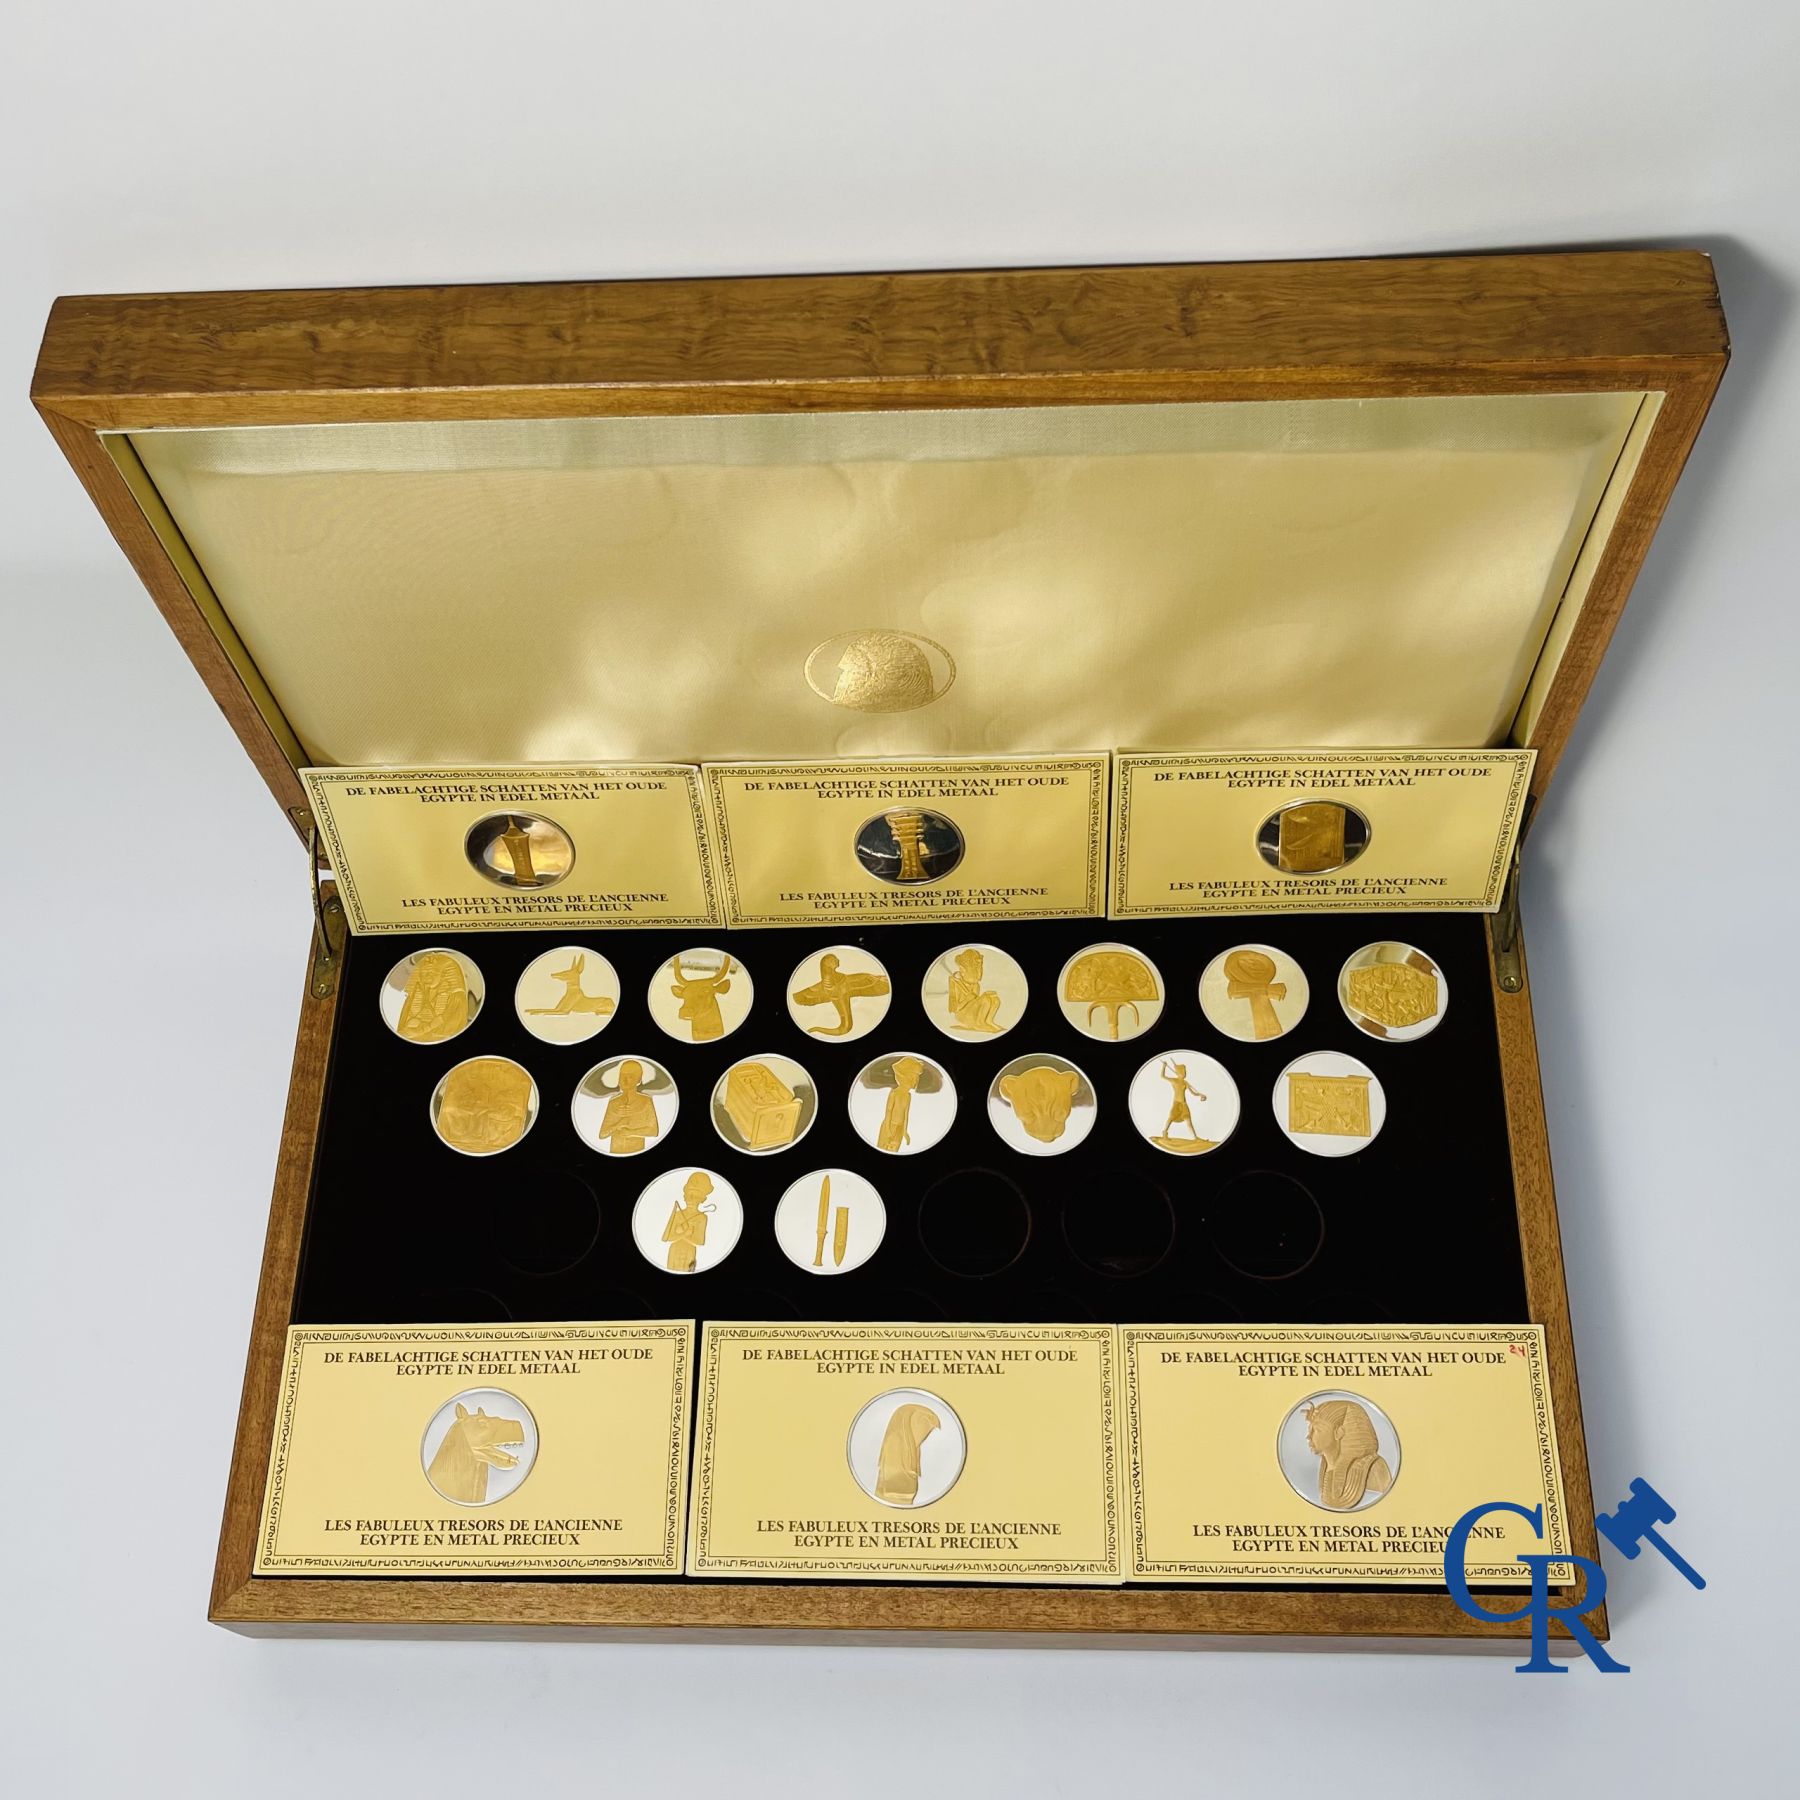 Medals/Medals: 24 Medals in Sterling silver, decorated with 24 carat gold. - Image 7 of 12